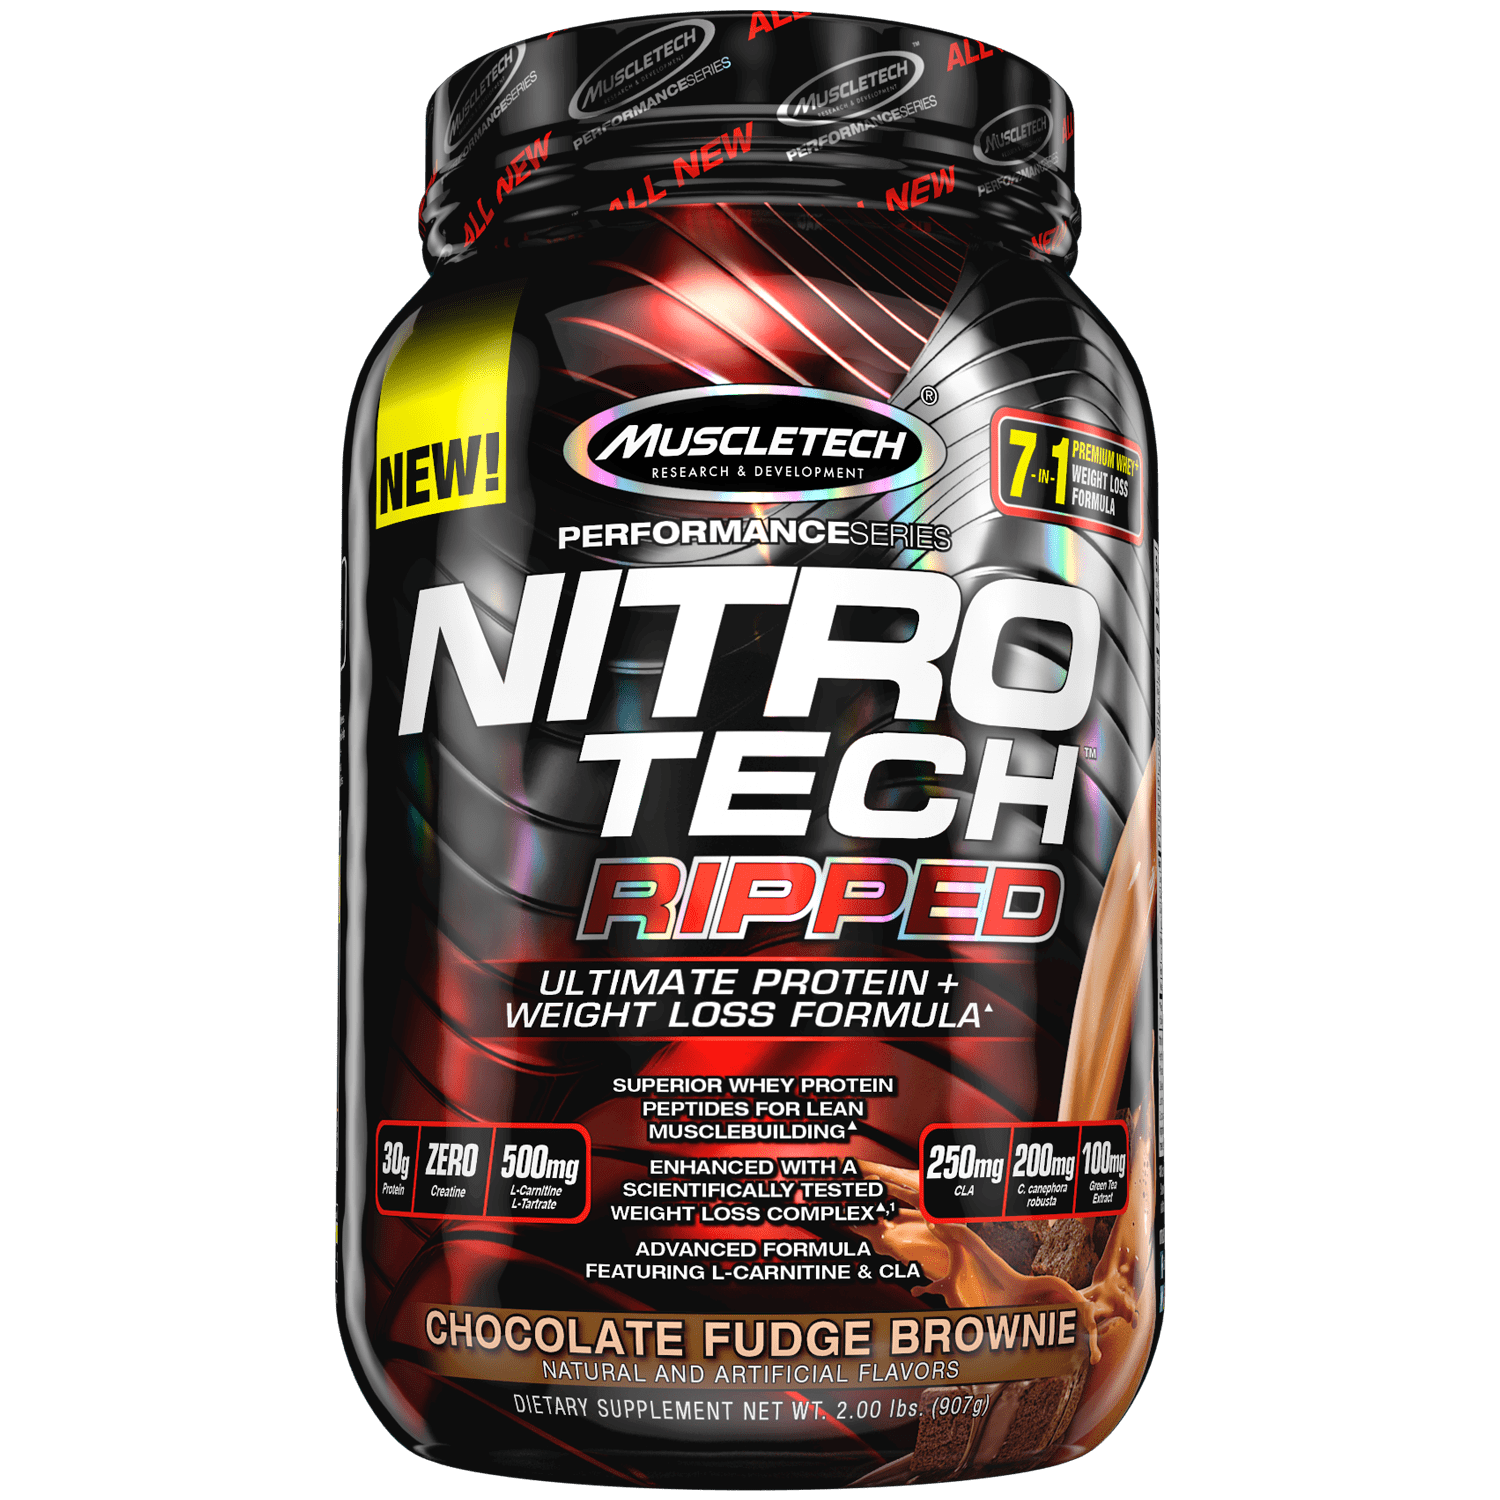 Nitro Tech Ripped Ultra Clean Whey Protein Isolate Powder + Weight Loss Formula, Low Sugar, Low Carb, Chocolate Fudge Brownie, 40 Servings (4lbs)